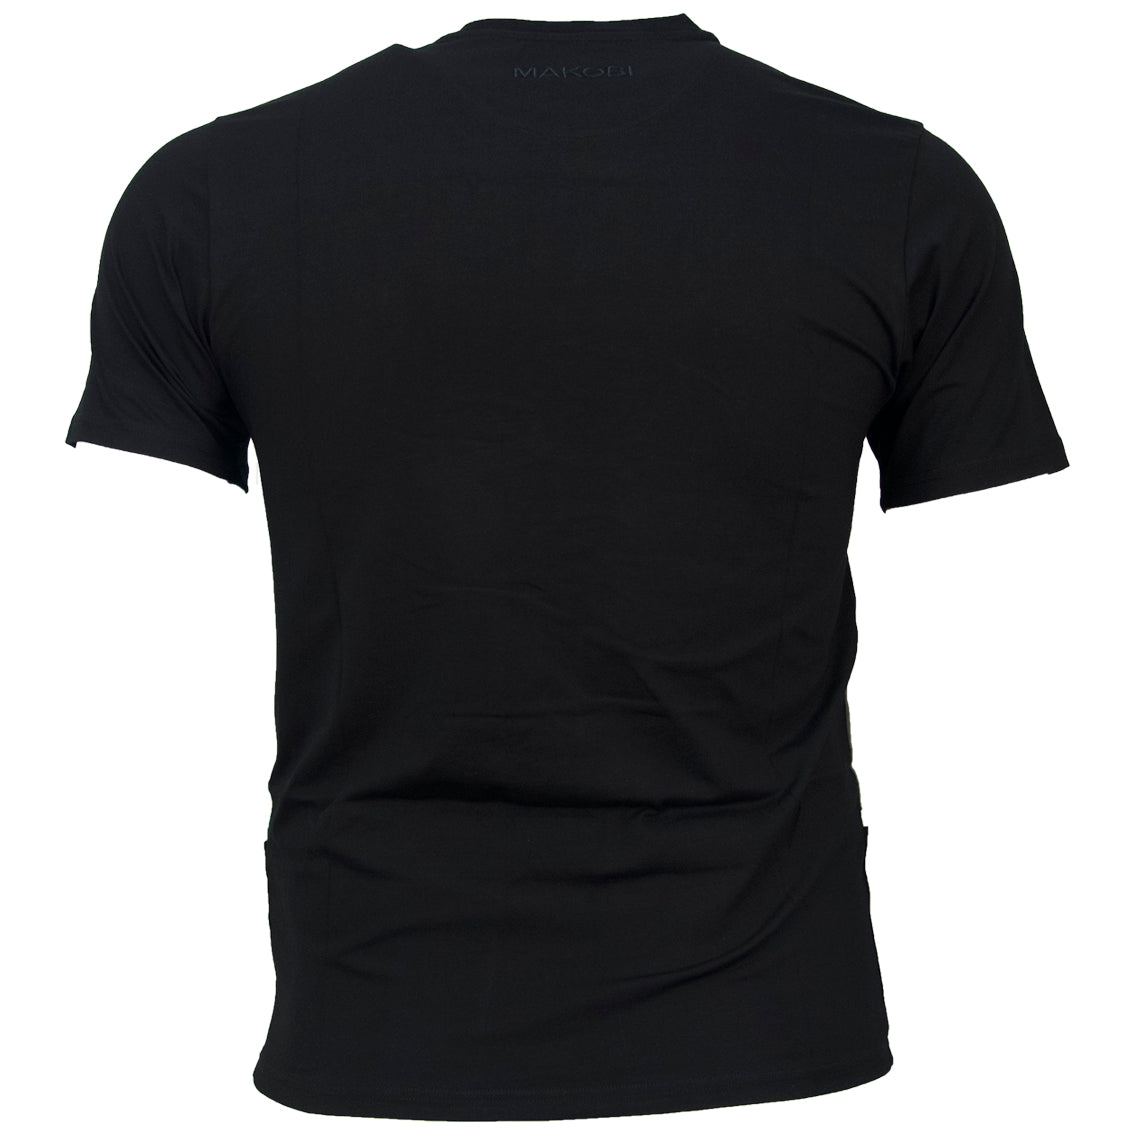 M279 Road To Riches Tee - Black